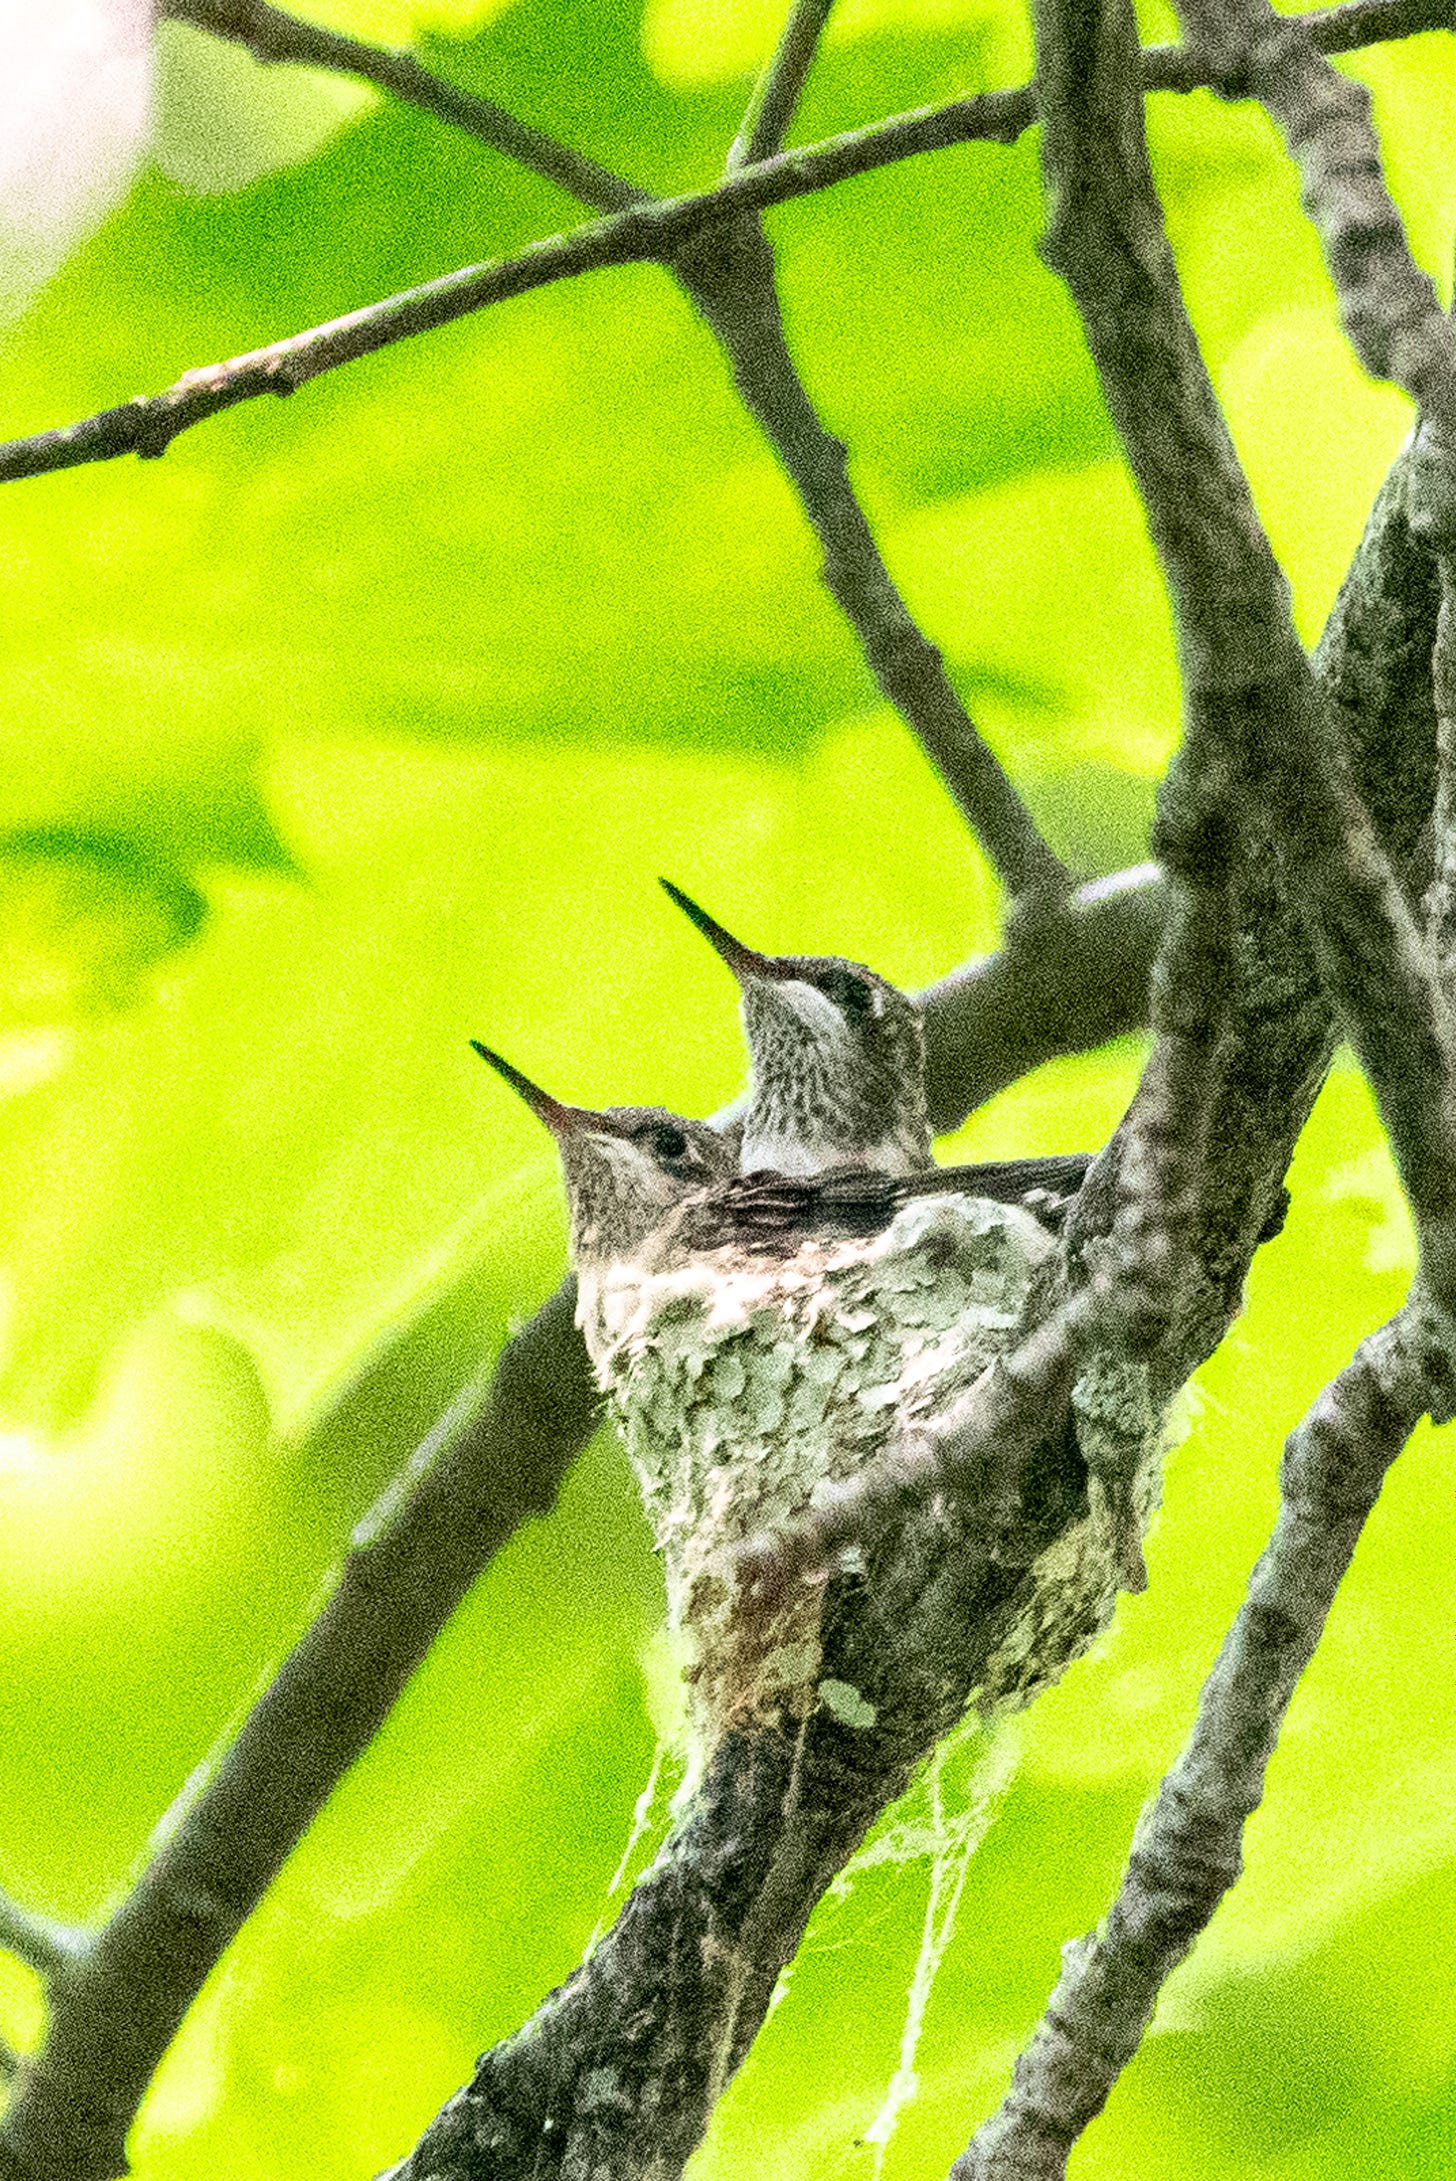 Two ruby-throated hummingbird nestlings wait for their mother to return